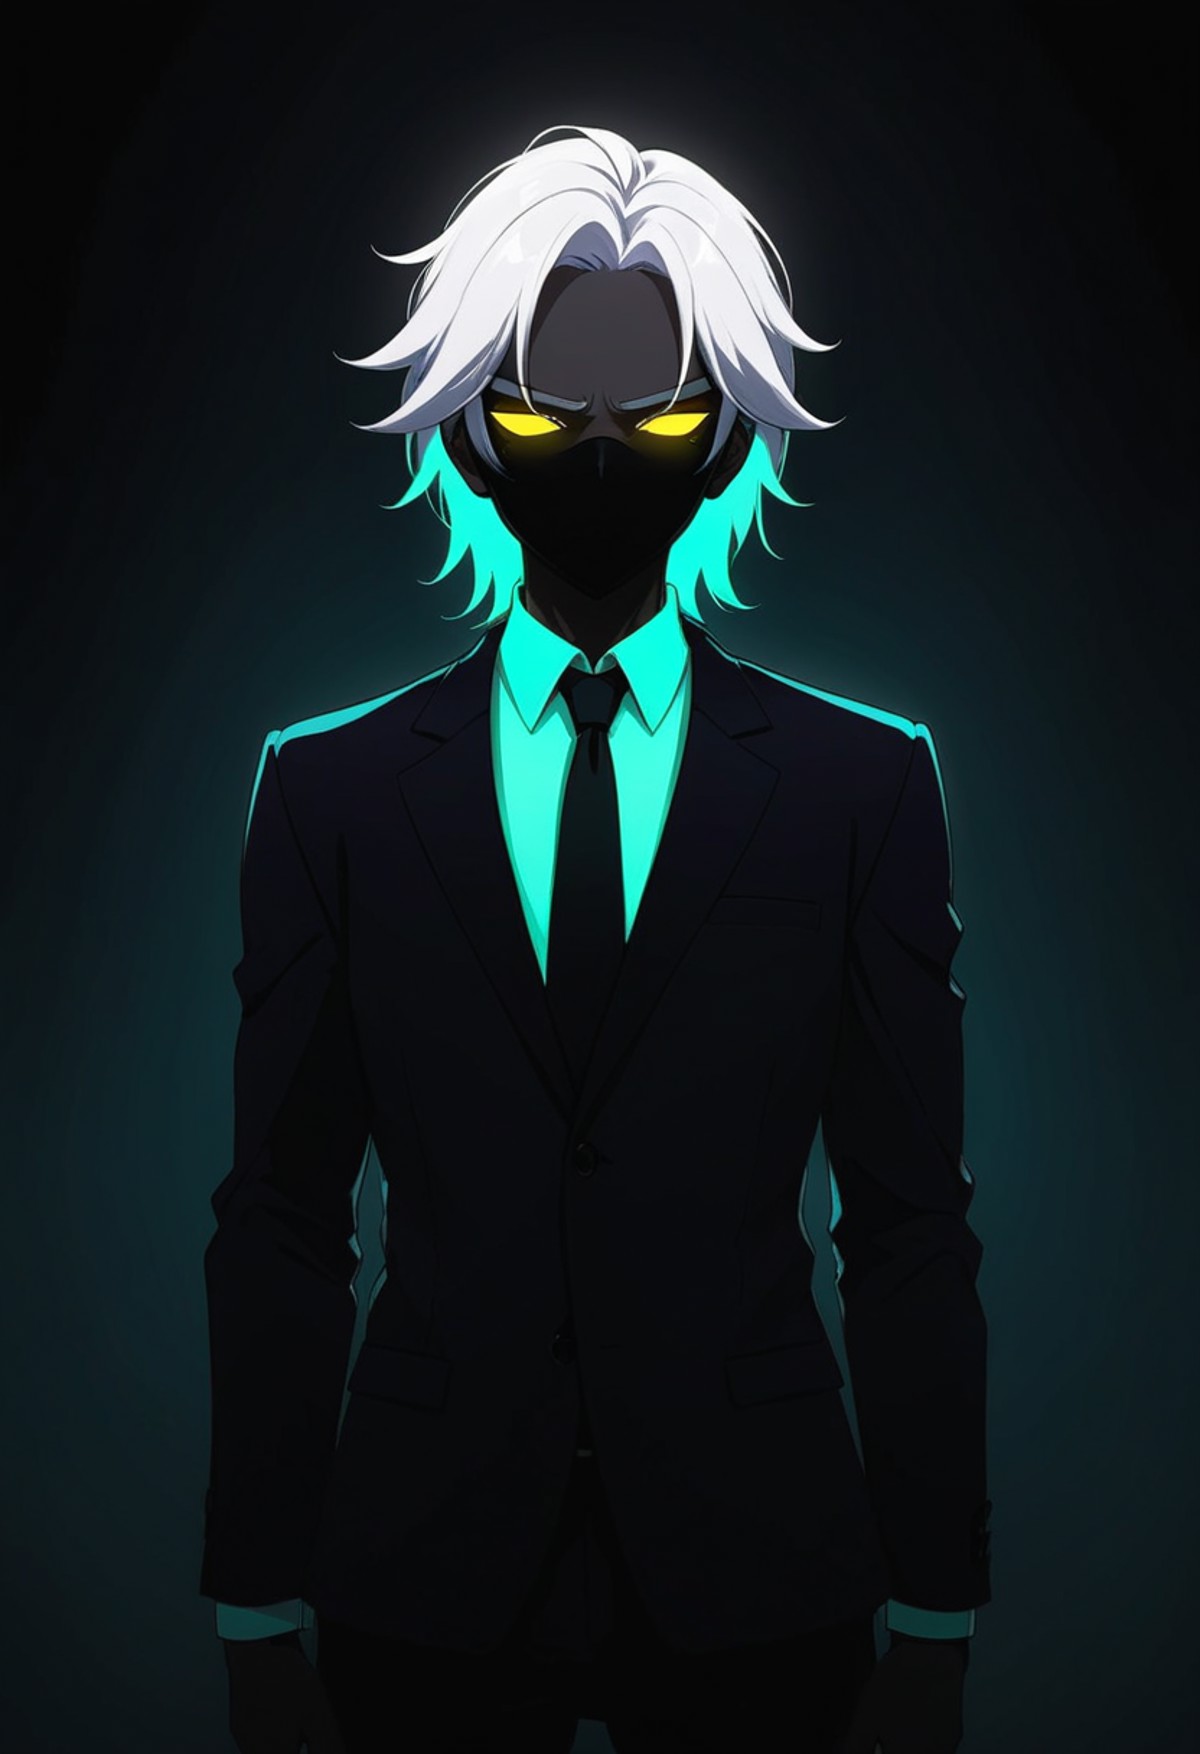 a white hair guy, eyes covered, wearing suit with a neon glowing hairs in the anime style of neon silhouette contrast, dar...